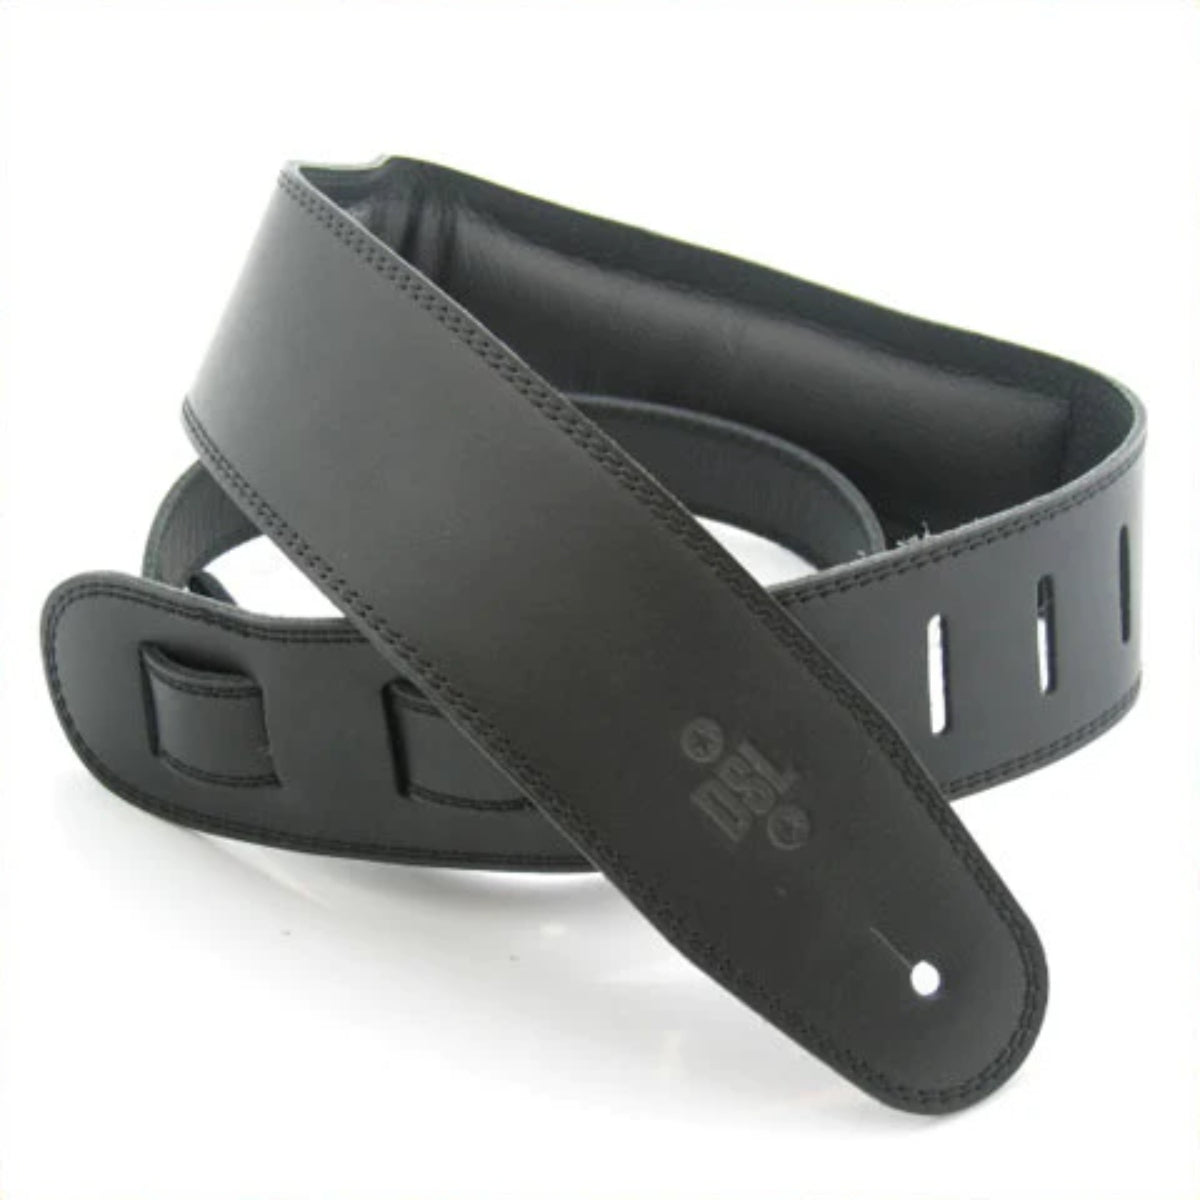 GEG25-15-1 2.5" Leather Strap, Black With Leather Backing